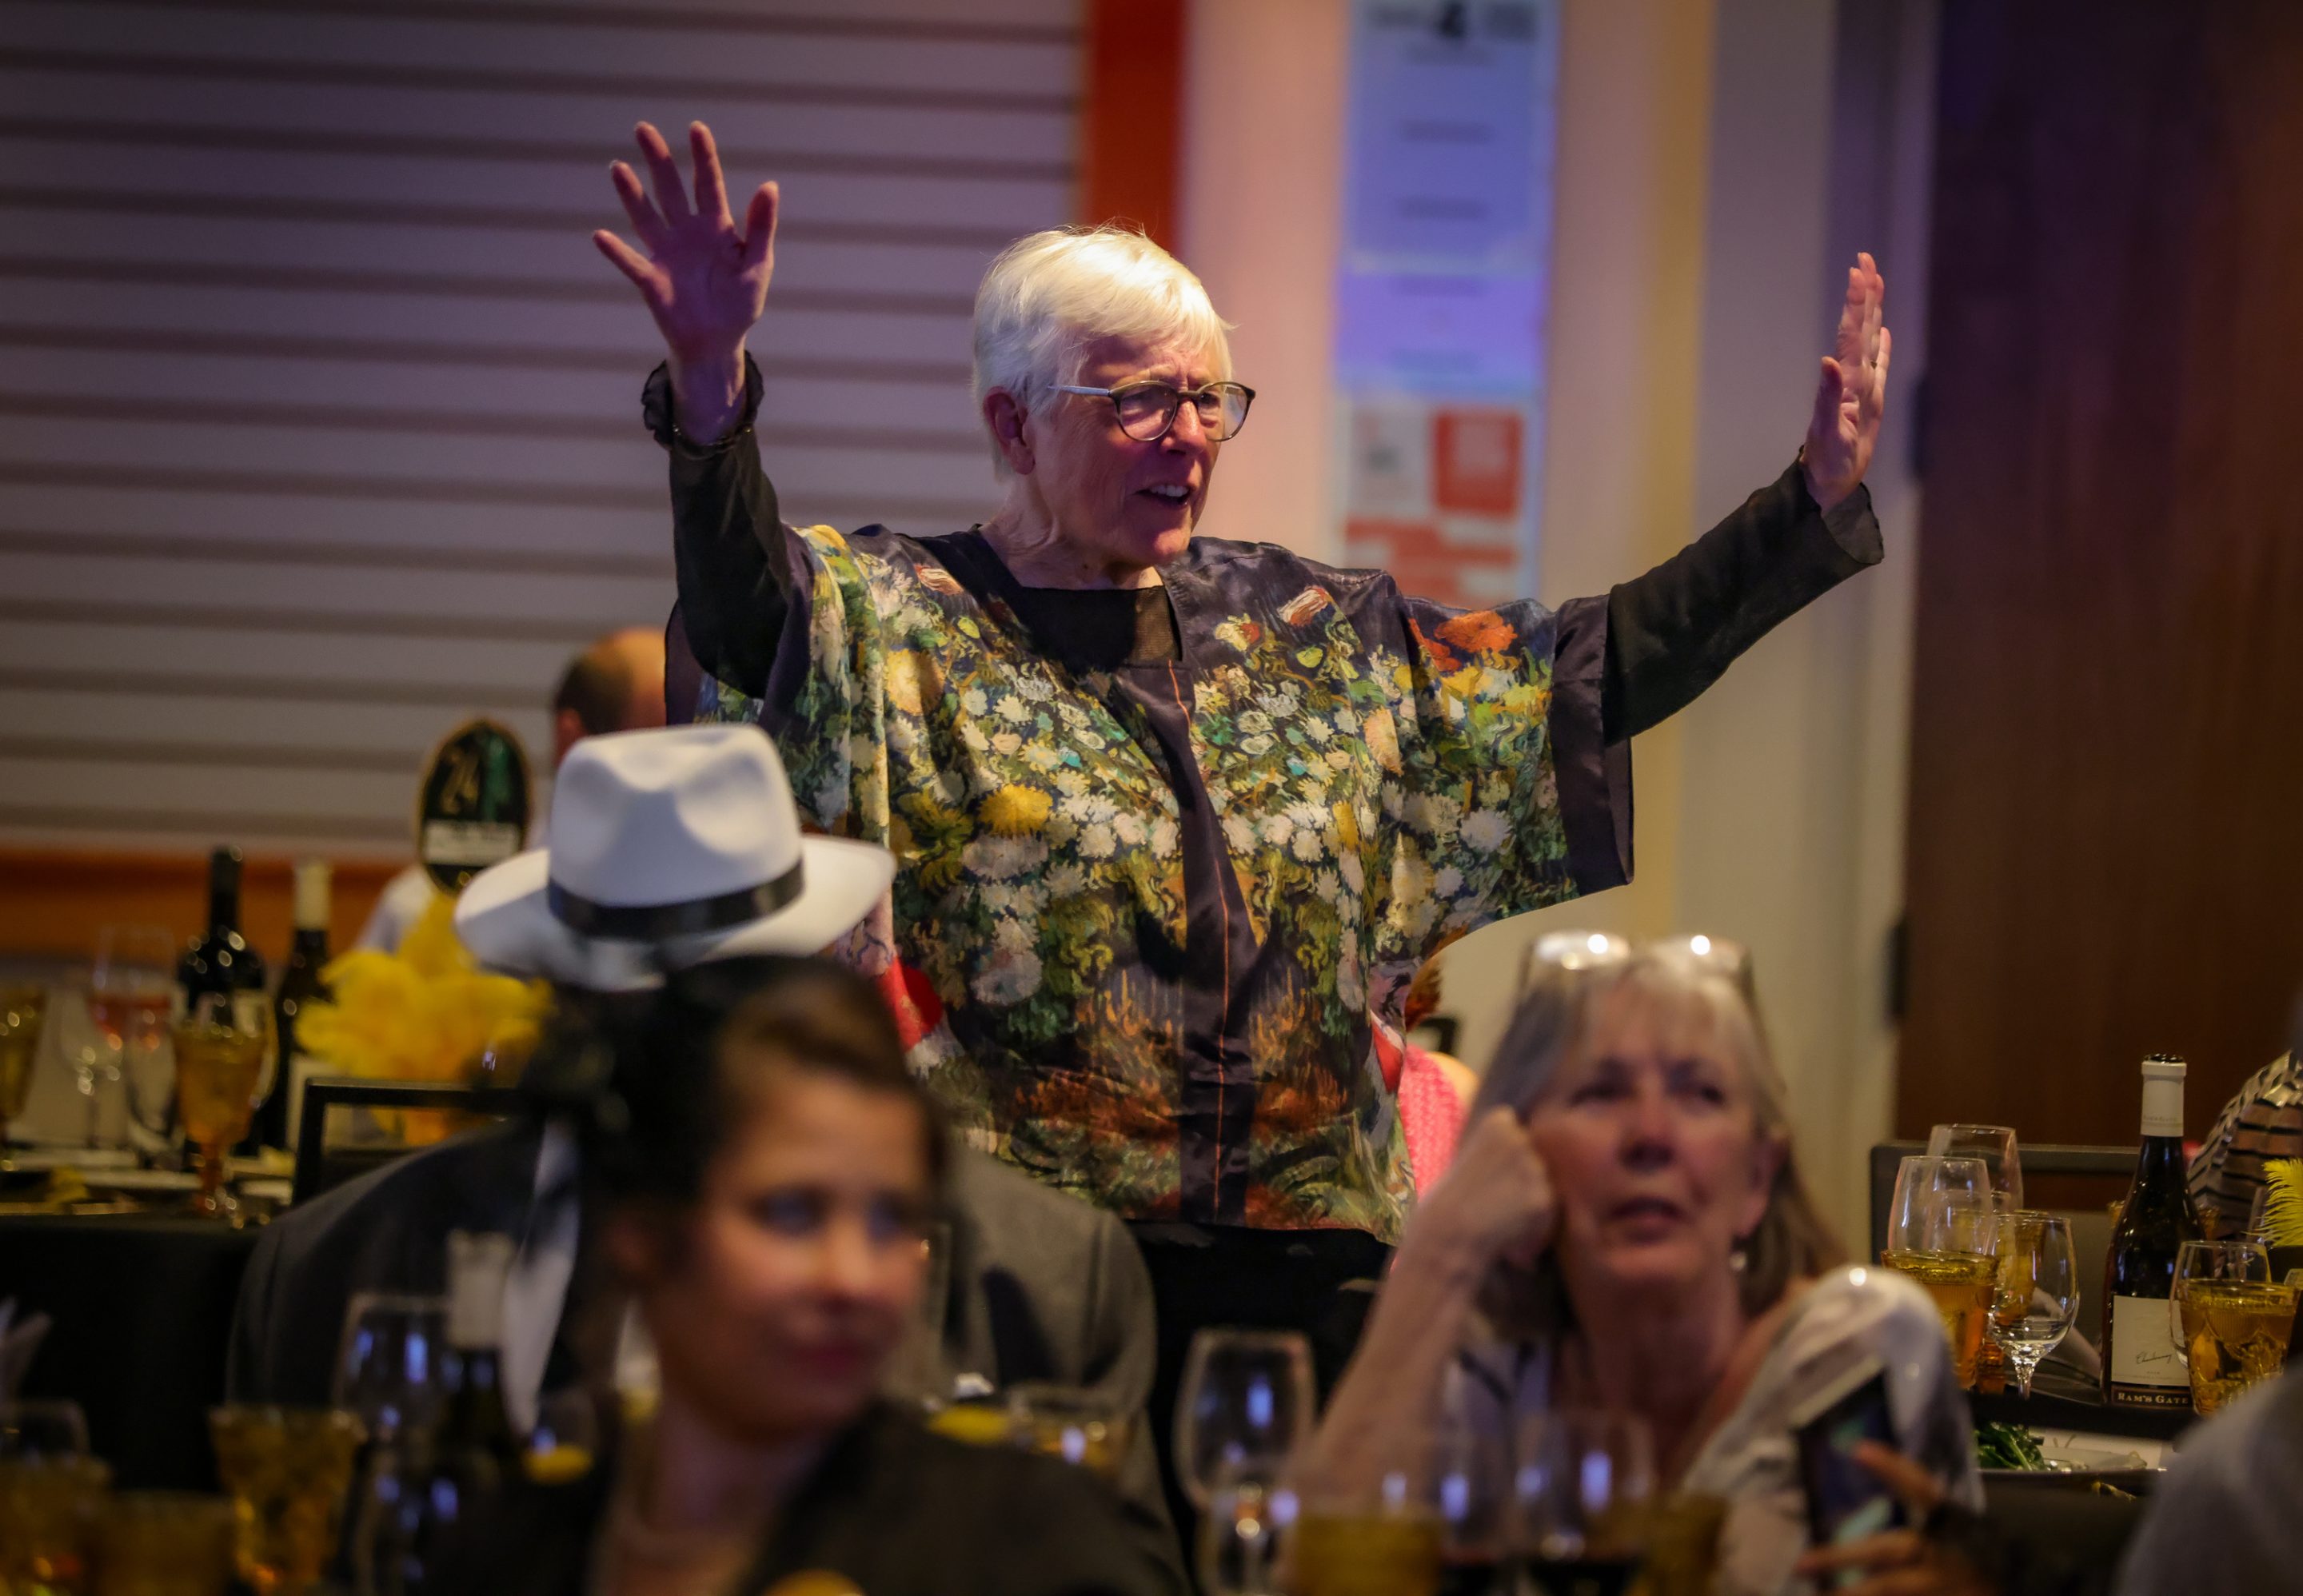 A woman is waving her arms at a dinner party hosted by The LIME Foundation of Santa Rosa.